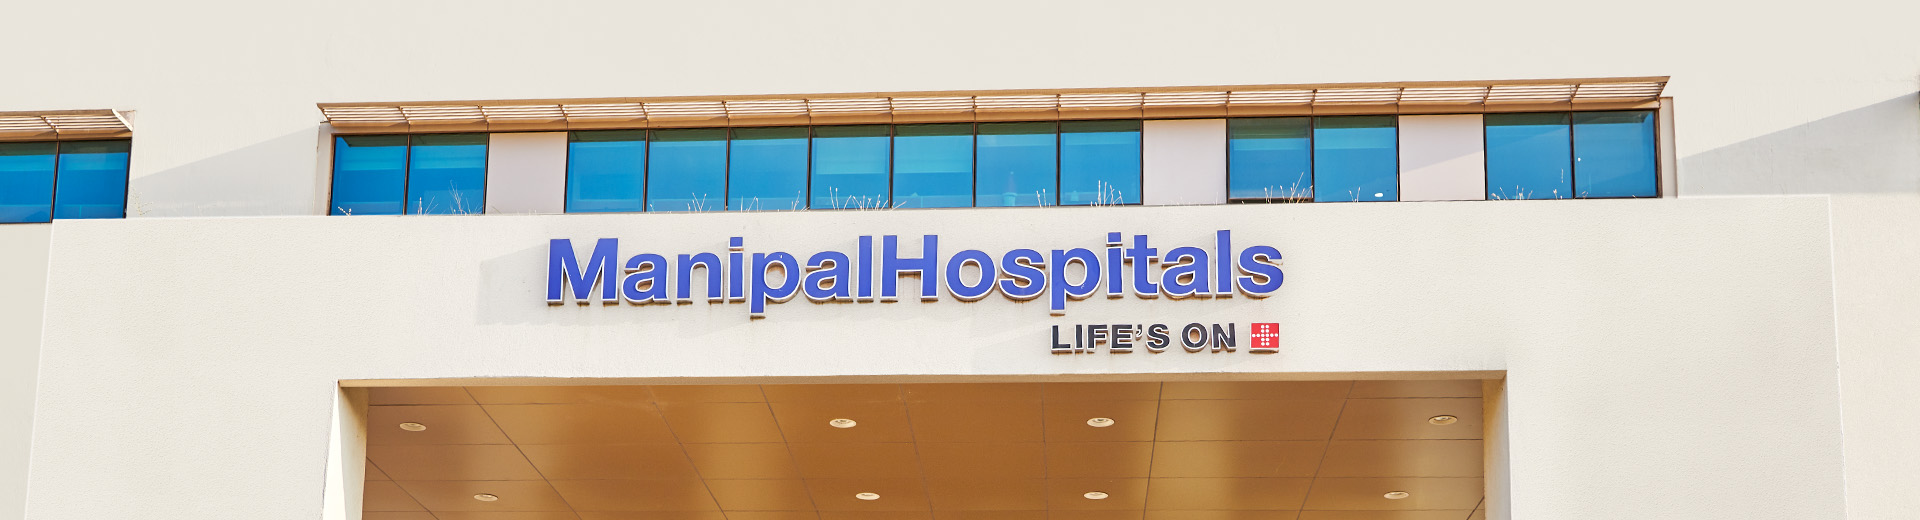 Terms and Conditions of Manipal Hospitals Panjim,Goa